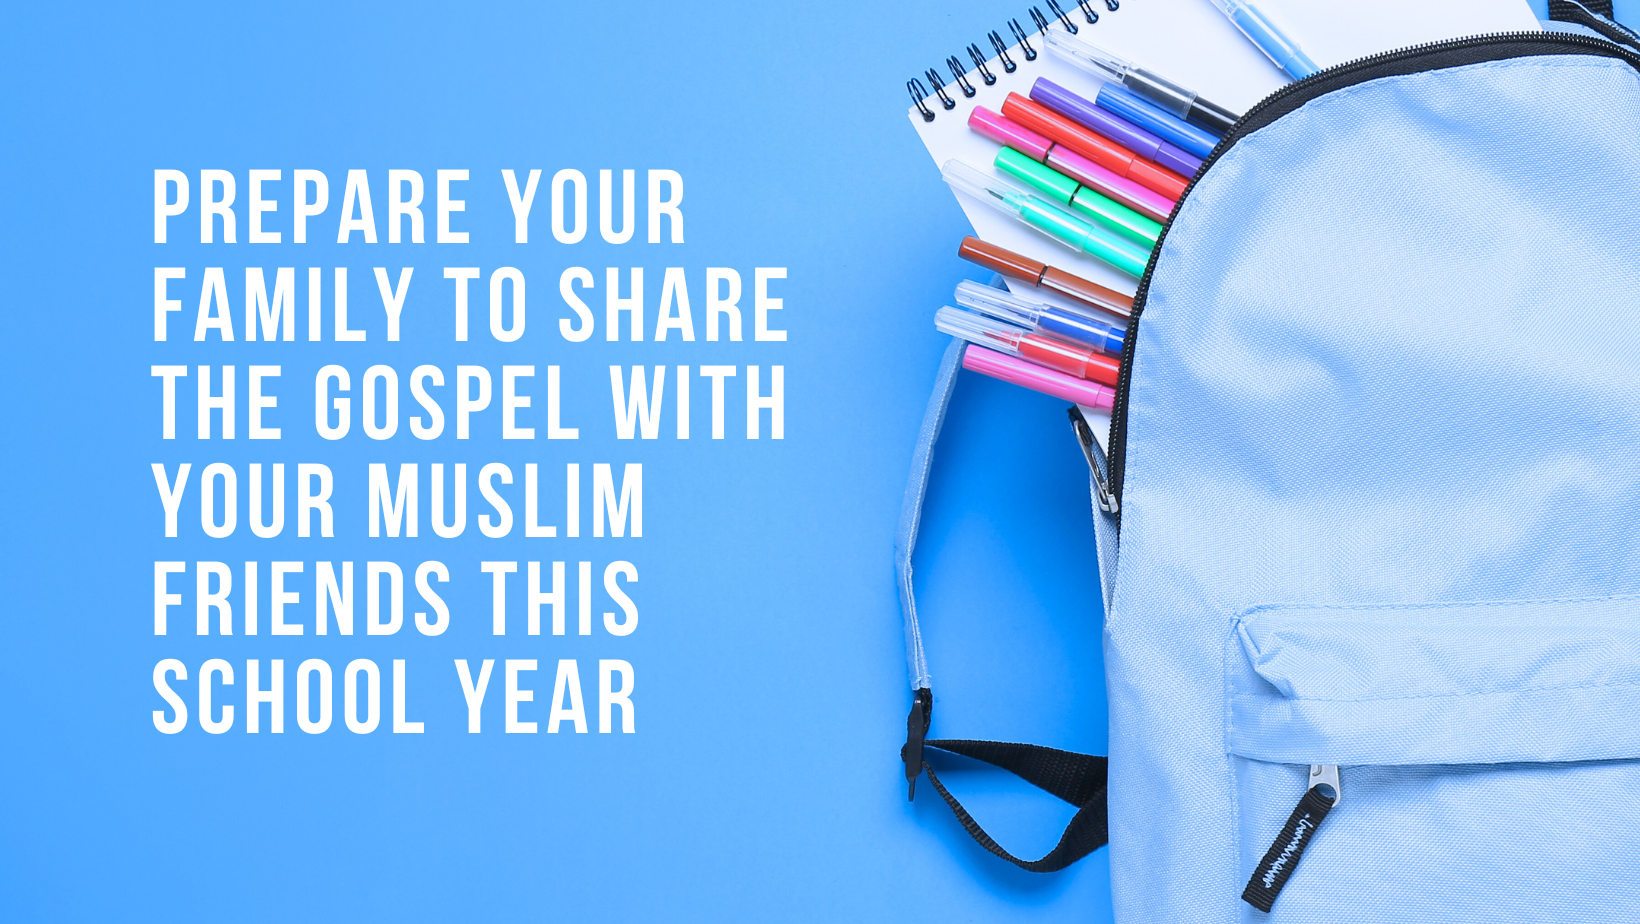 Prepare your family to share the gospel with your Muslim friends this school year